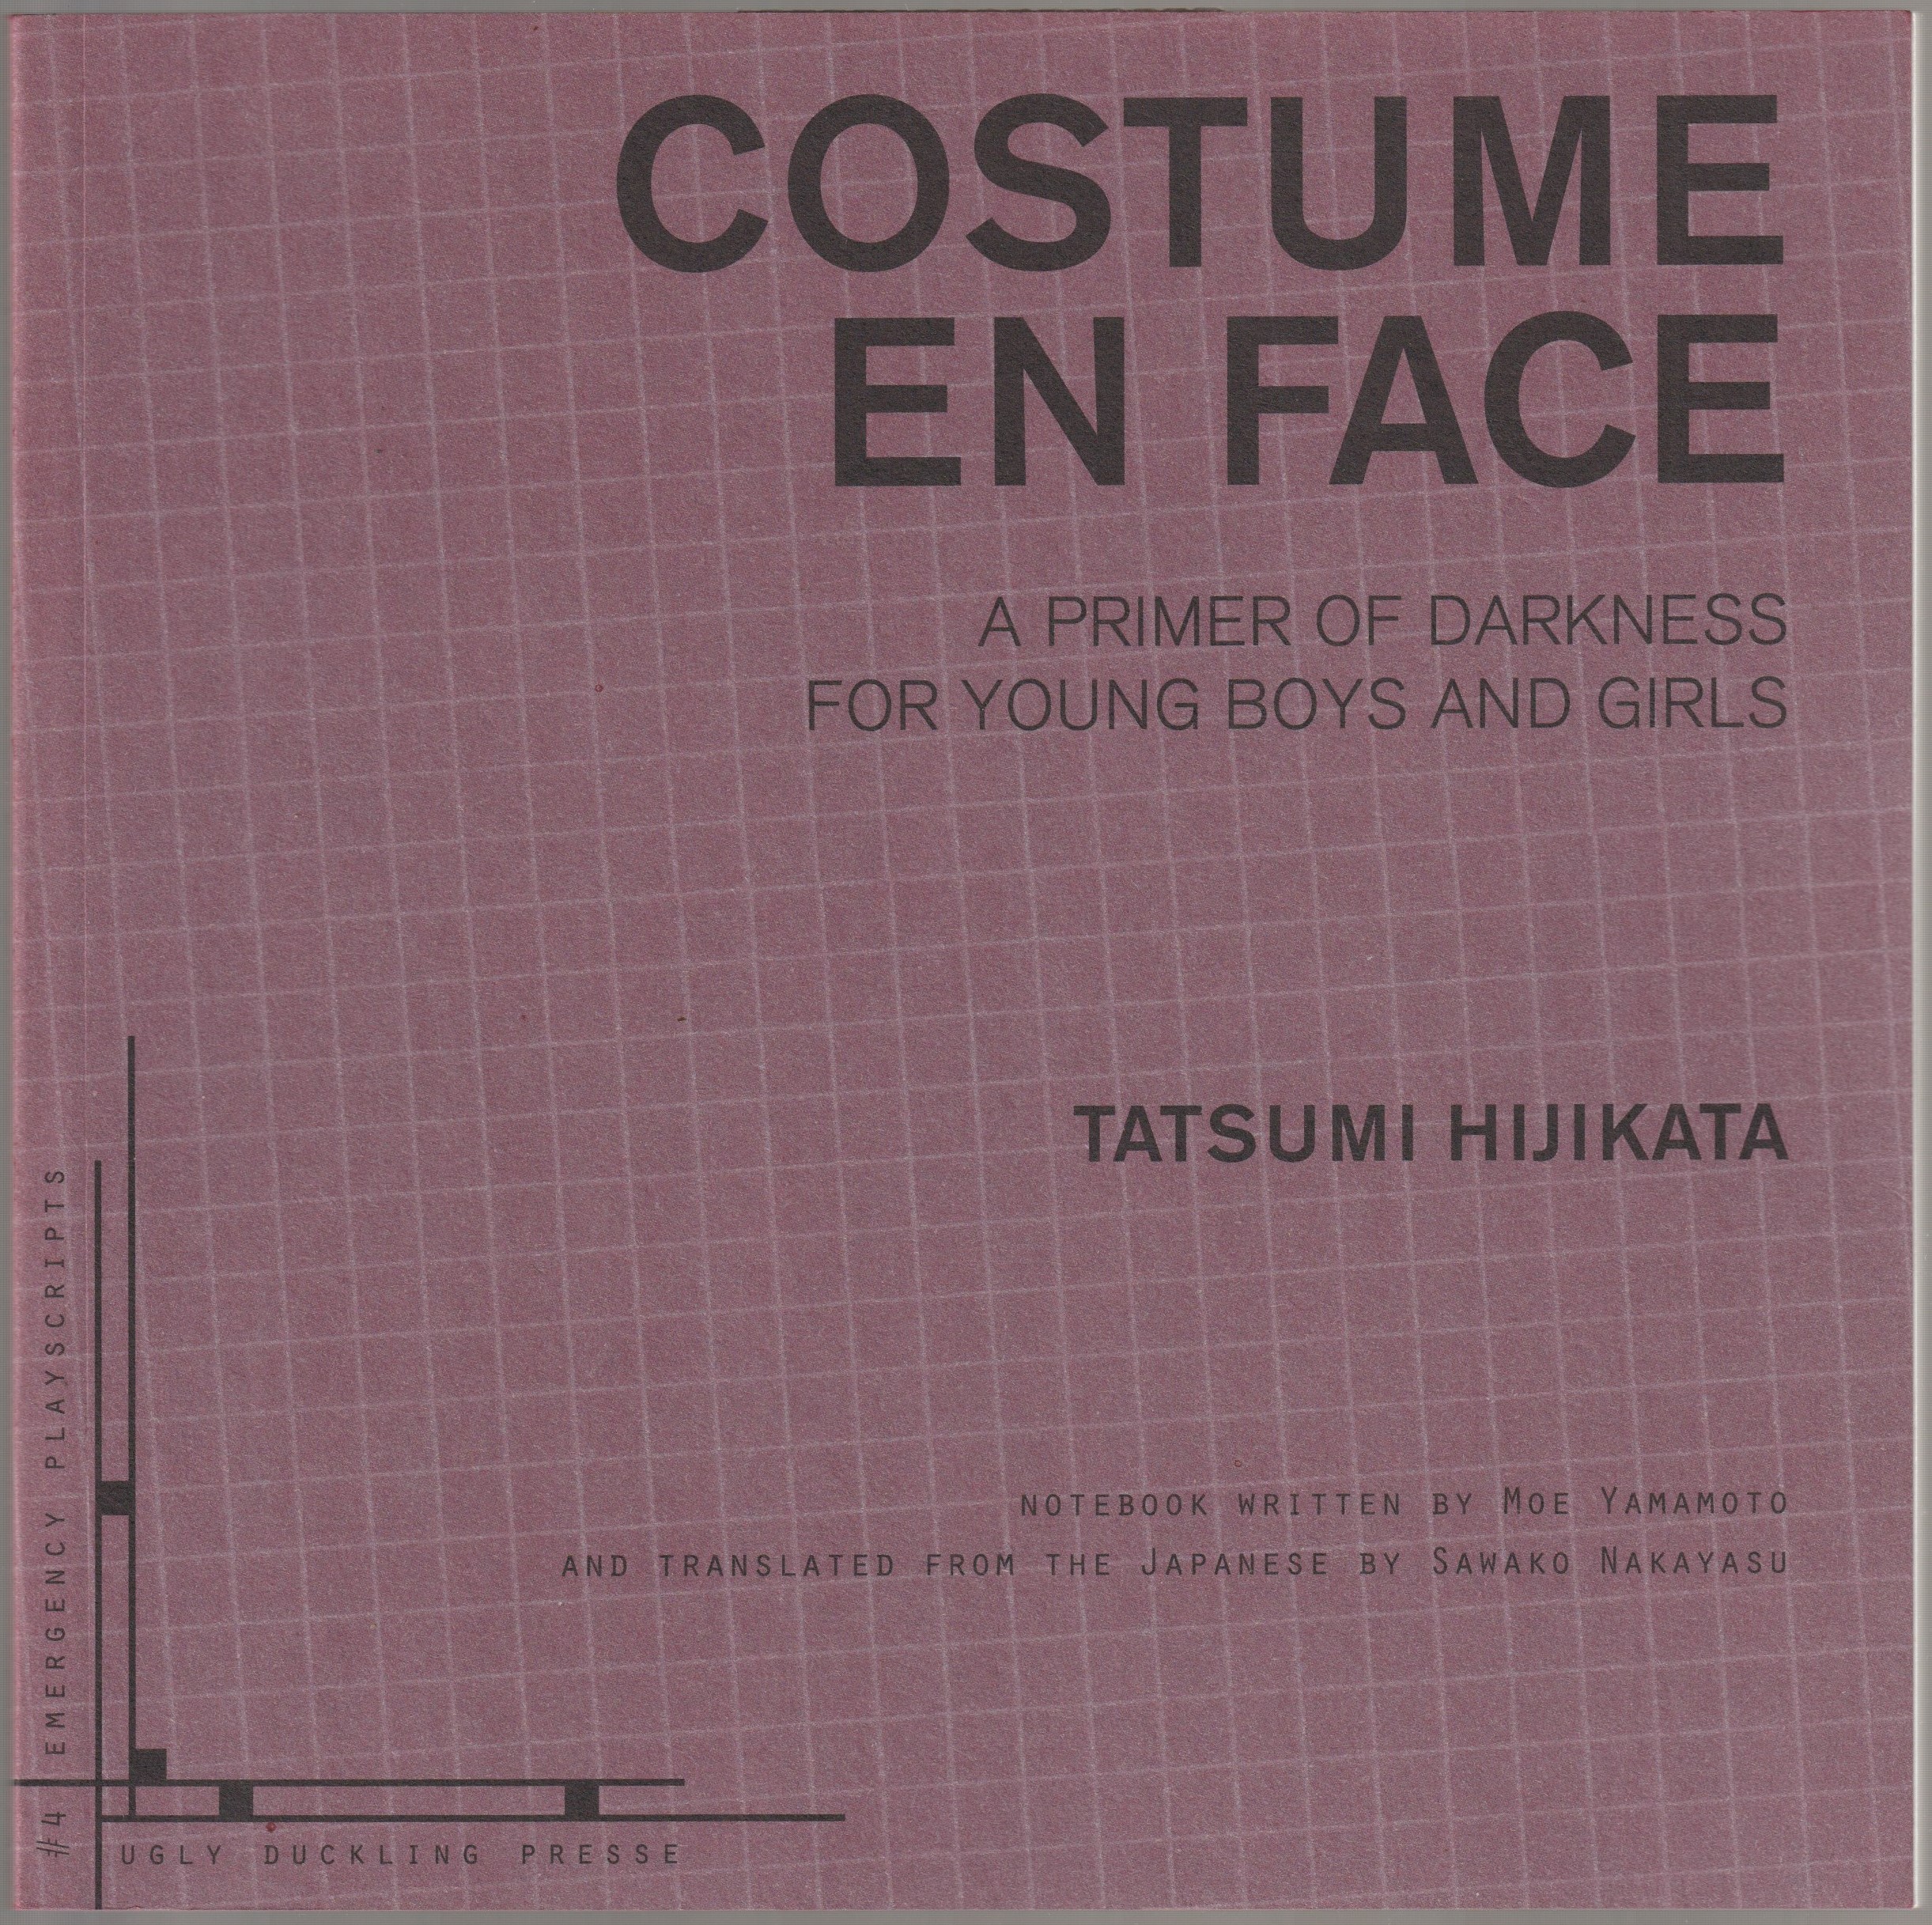 Costume en face : a primer of darkness for young boys and girls